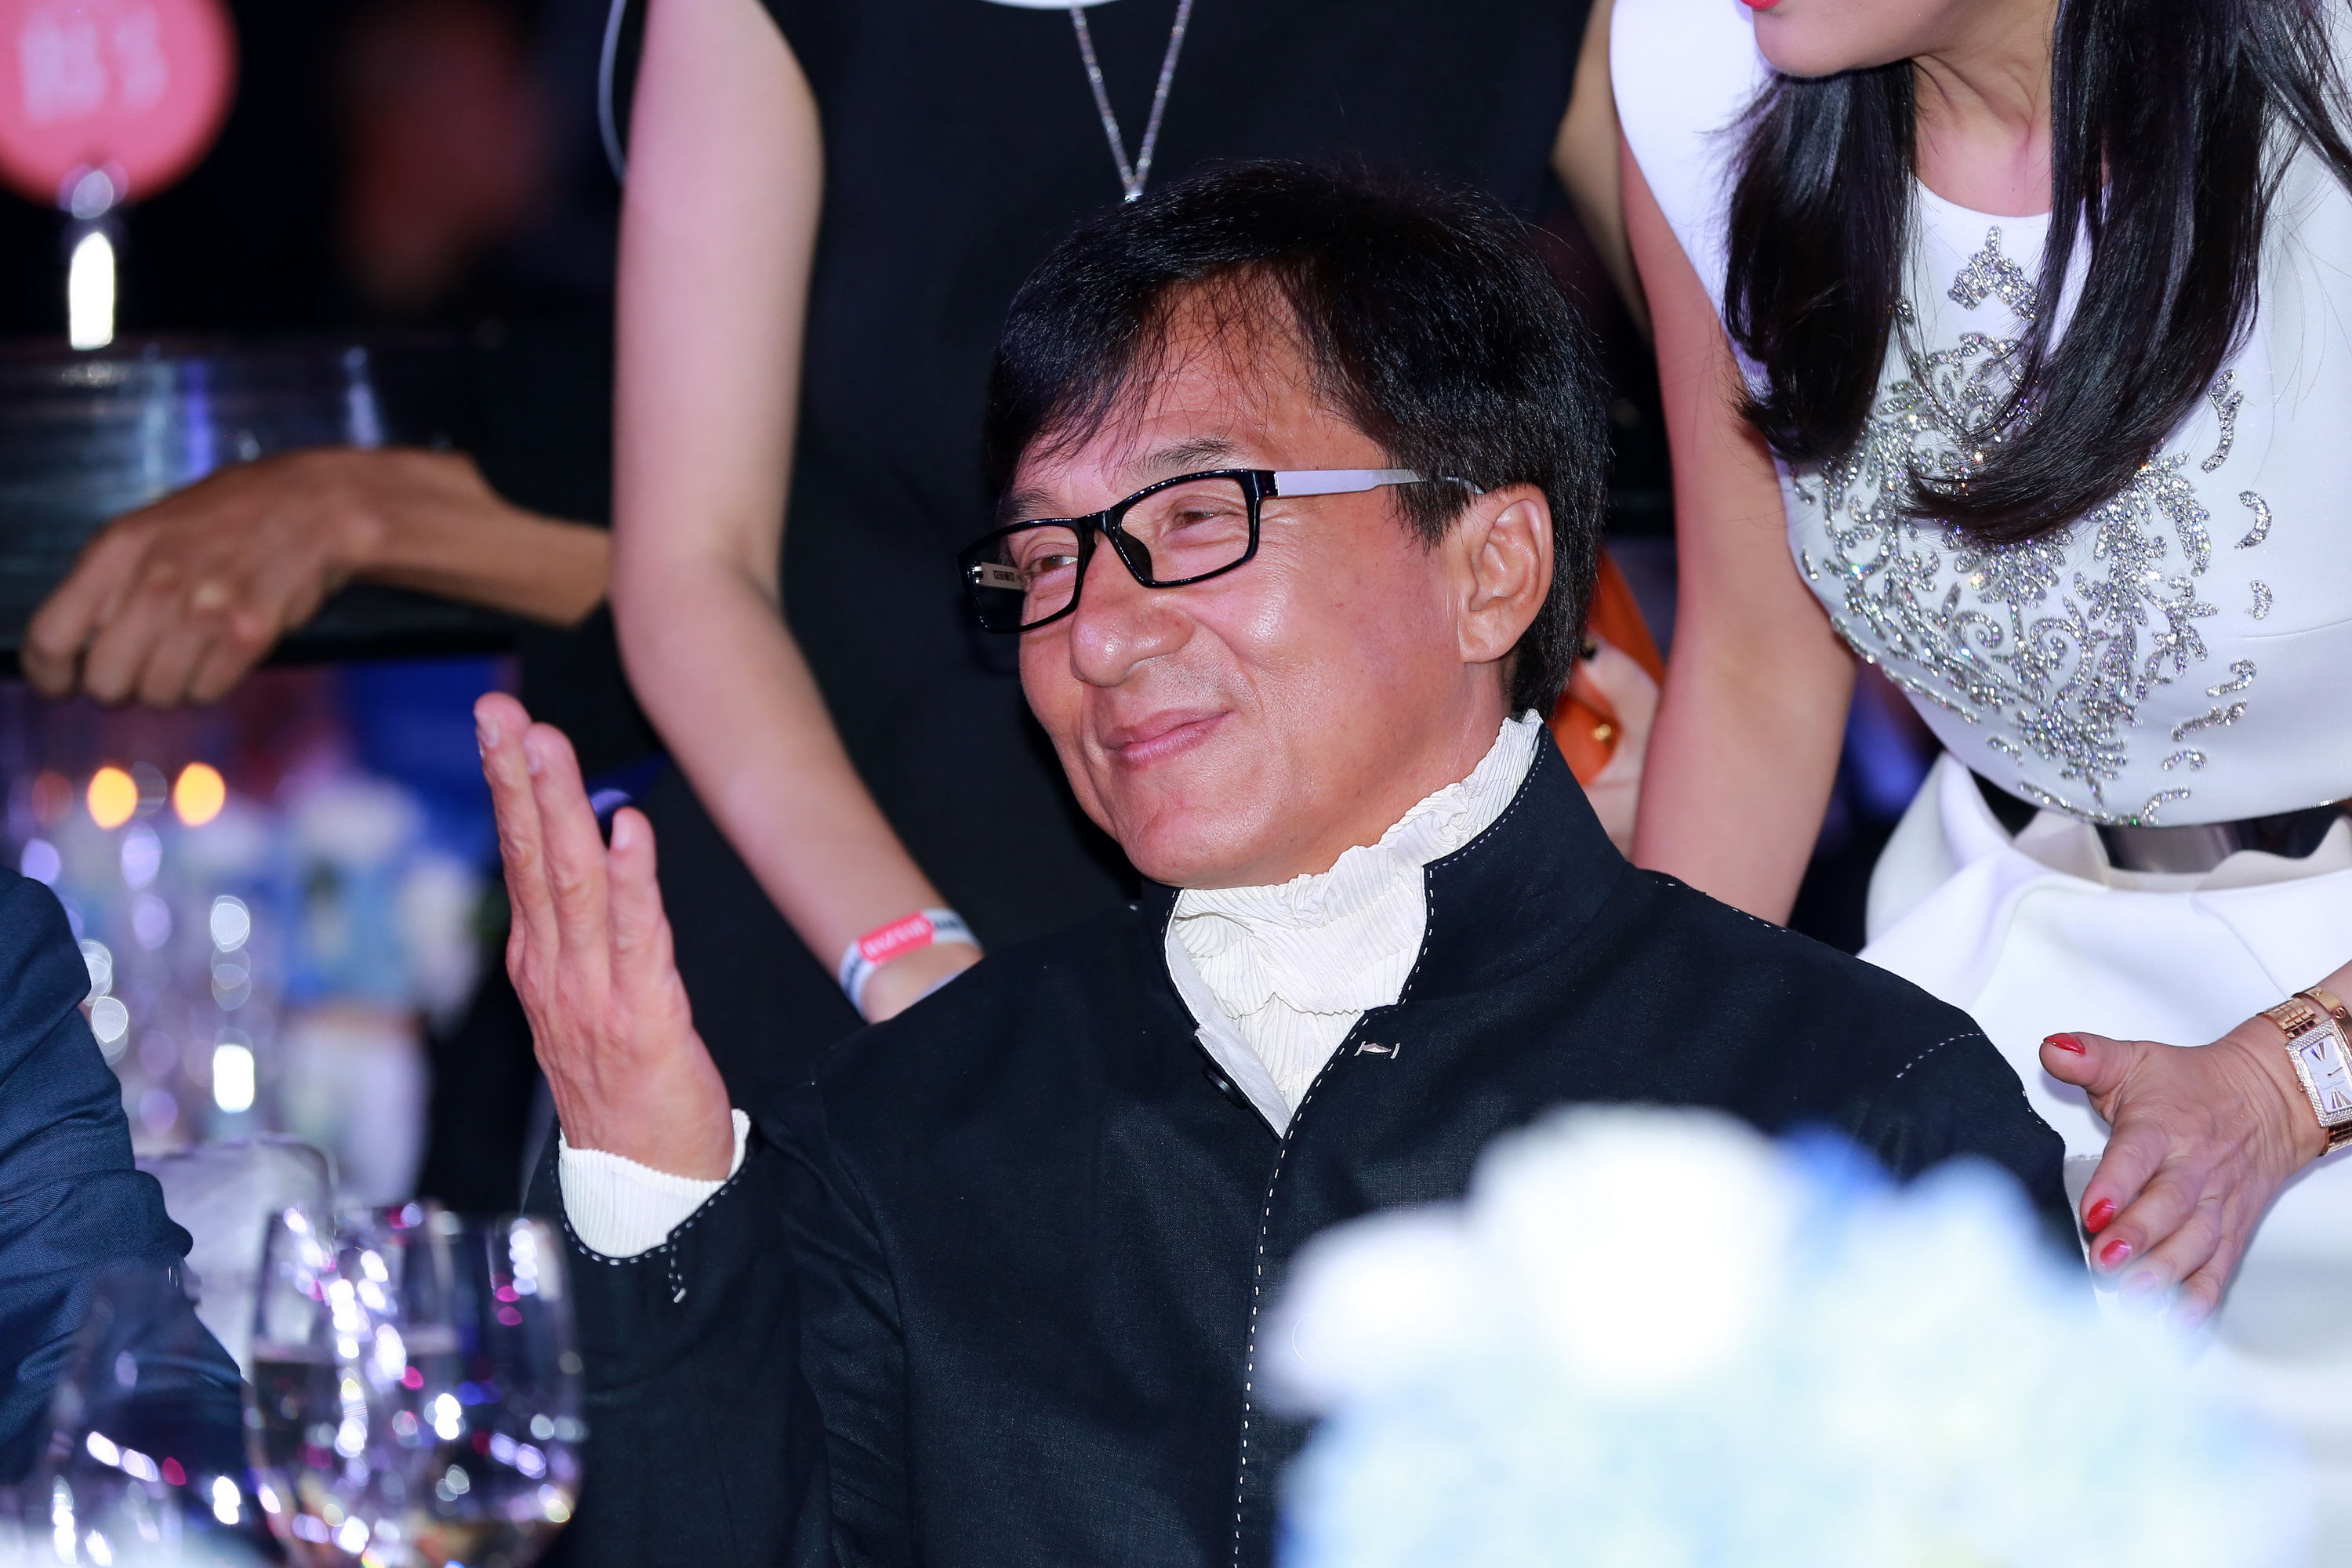 Actor Jackie Chan attends the 2014 Bazaar Charity Night in Beijing on Sept. 19, 2014 (ChinaFotoPress/Getty)